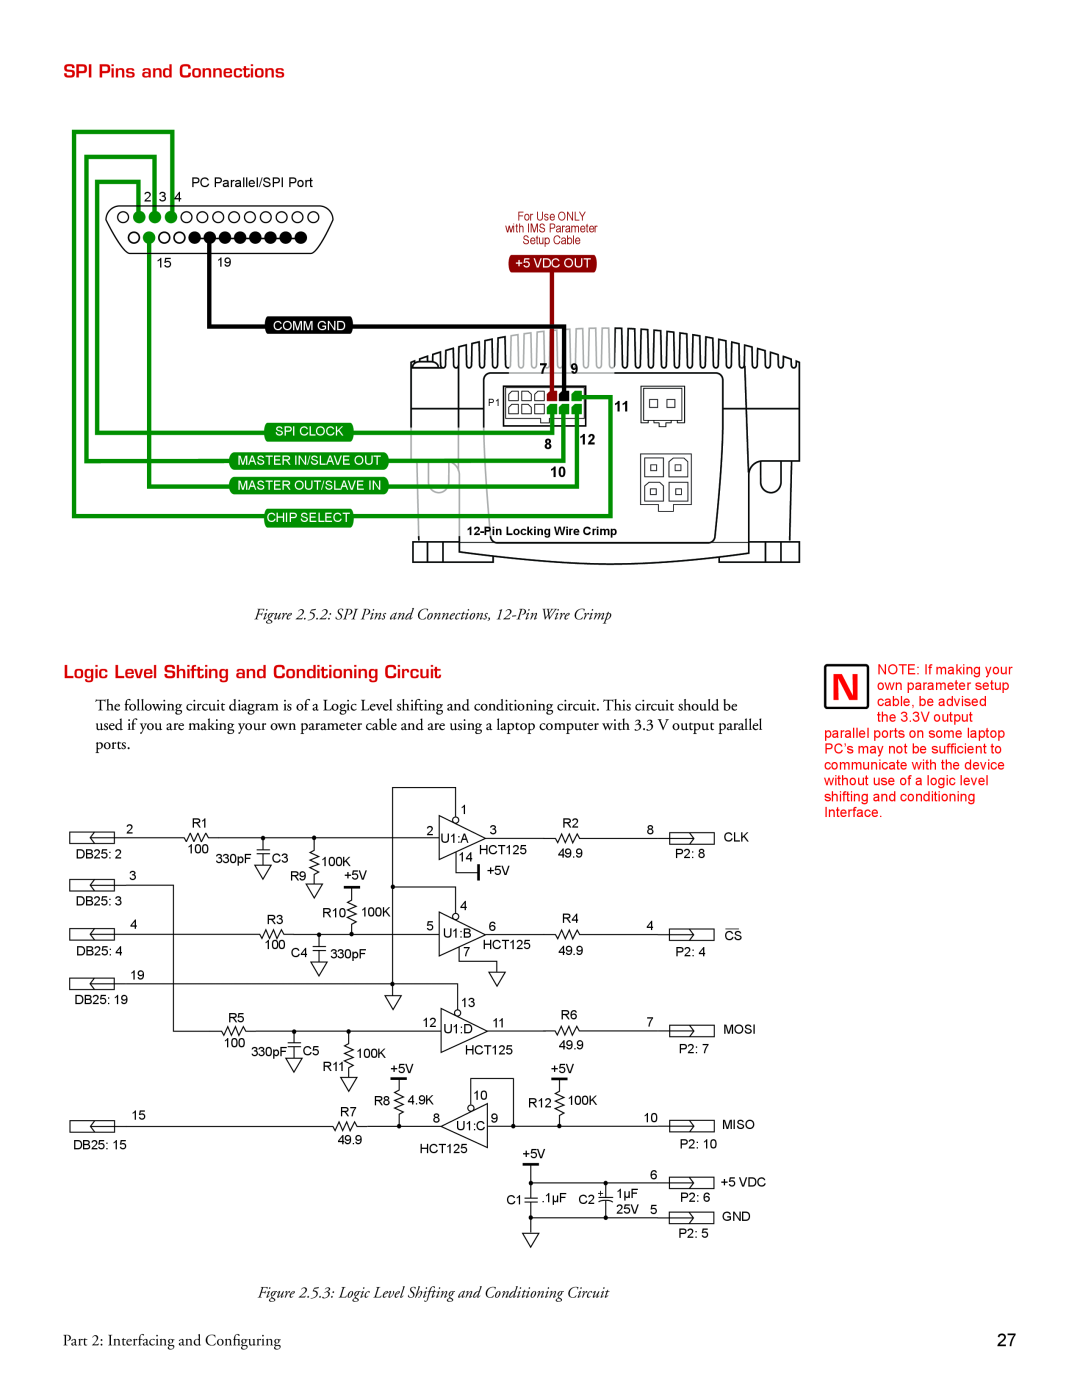 Intelligent Motion Systems Motion Detector SPI Pins and Connections, Logic Level Shifting and Conditioning Circuit 